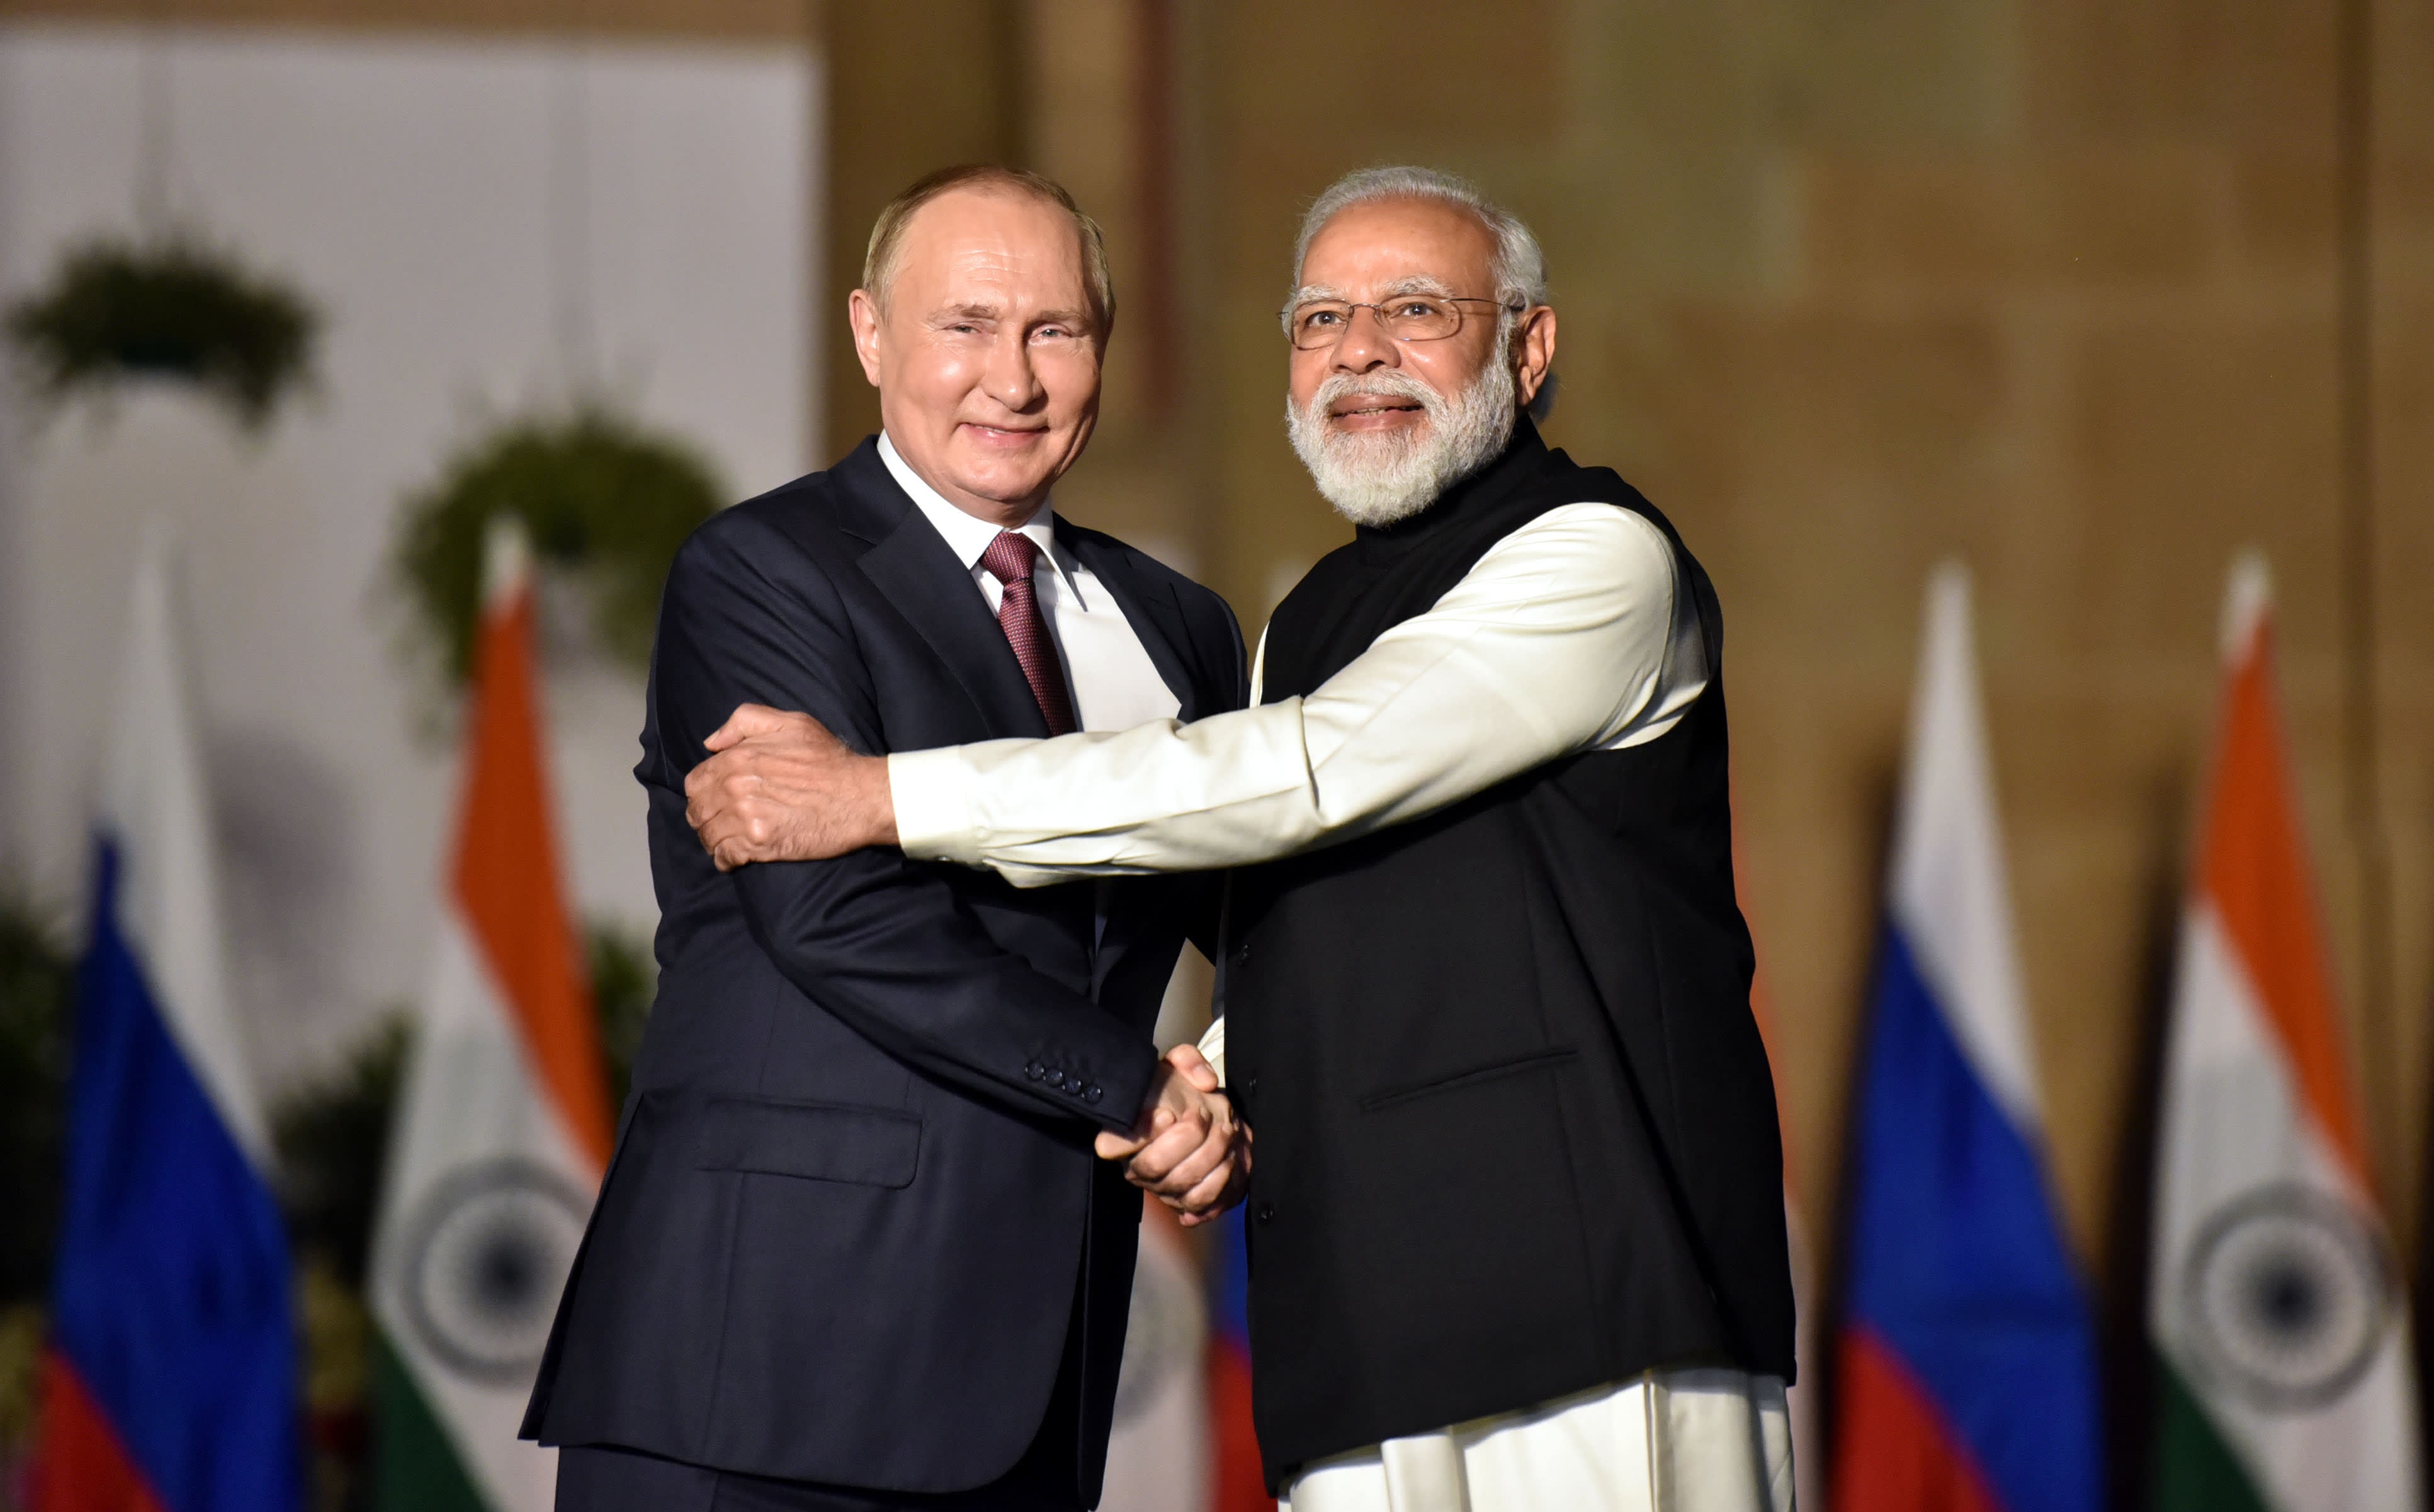 India and Russia - natural partners in energy collaboration